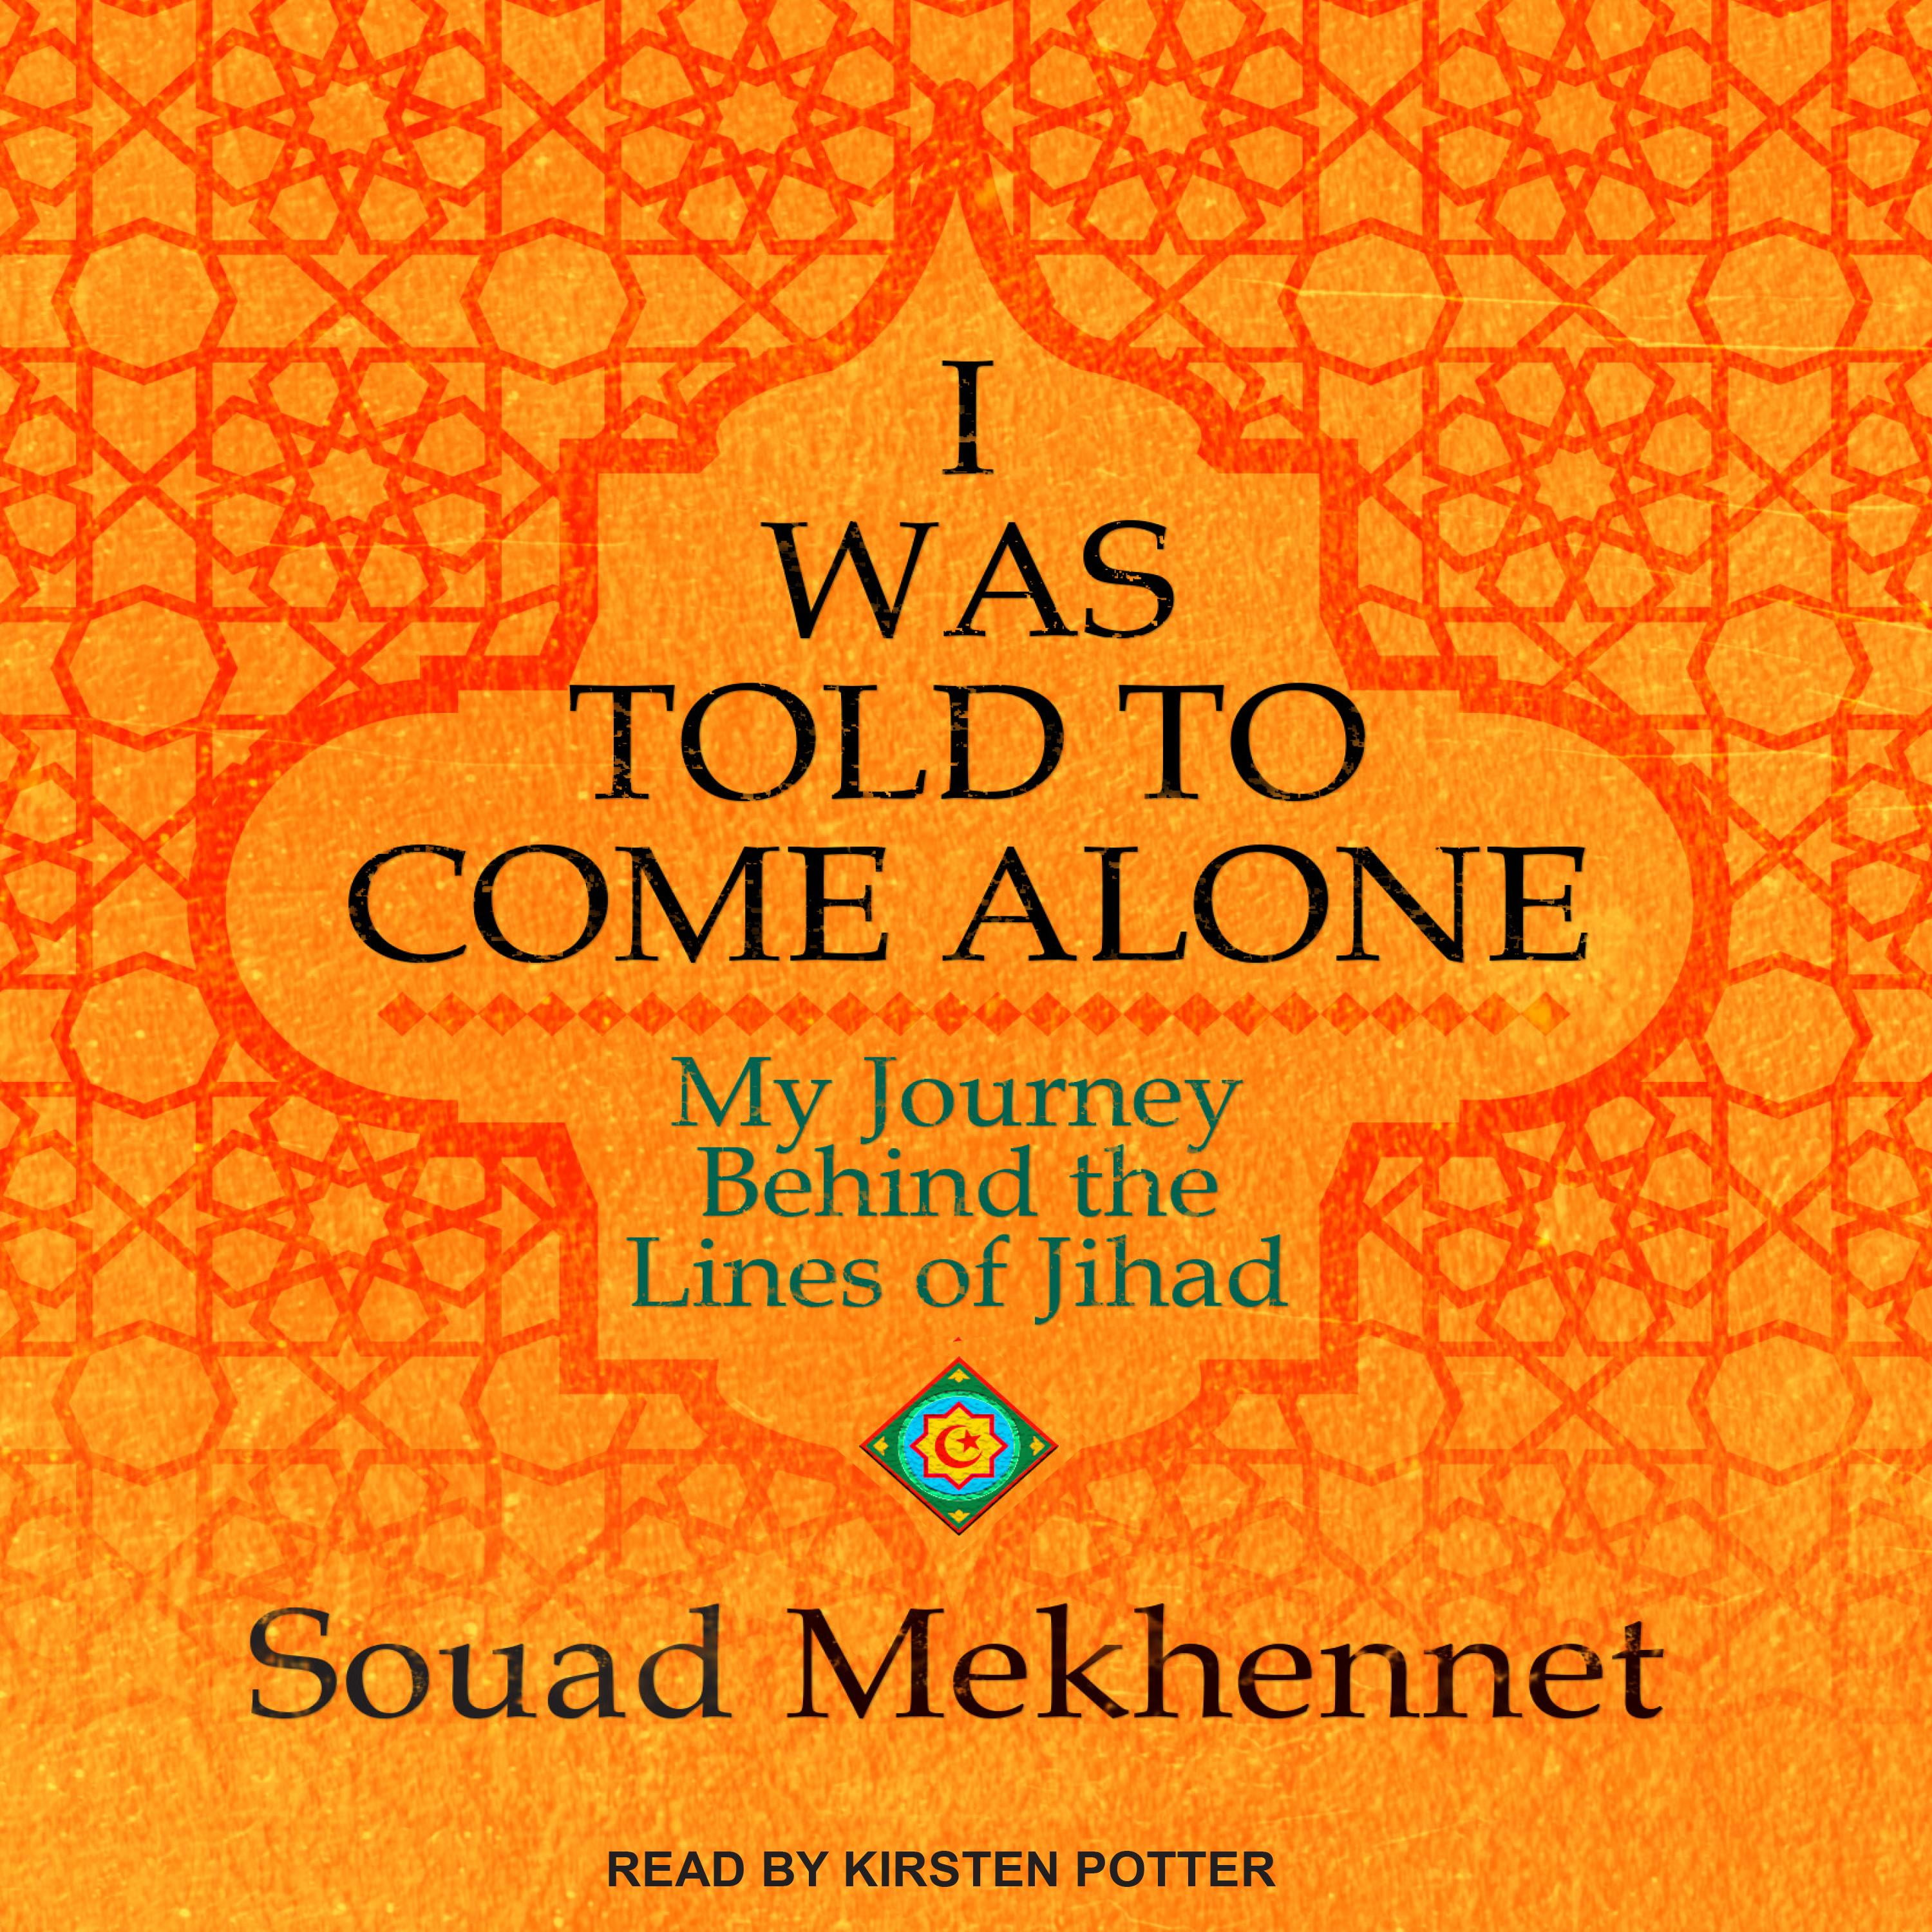 I-Was-Told-to-Come-Alone-My-Journey-Behind-the-Lines-of-Jihad